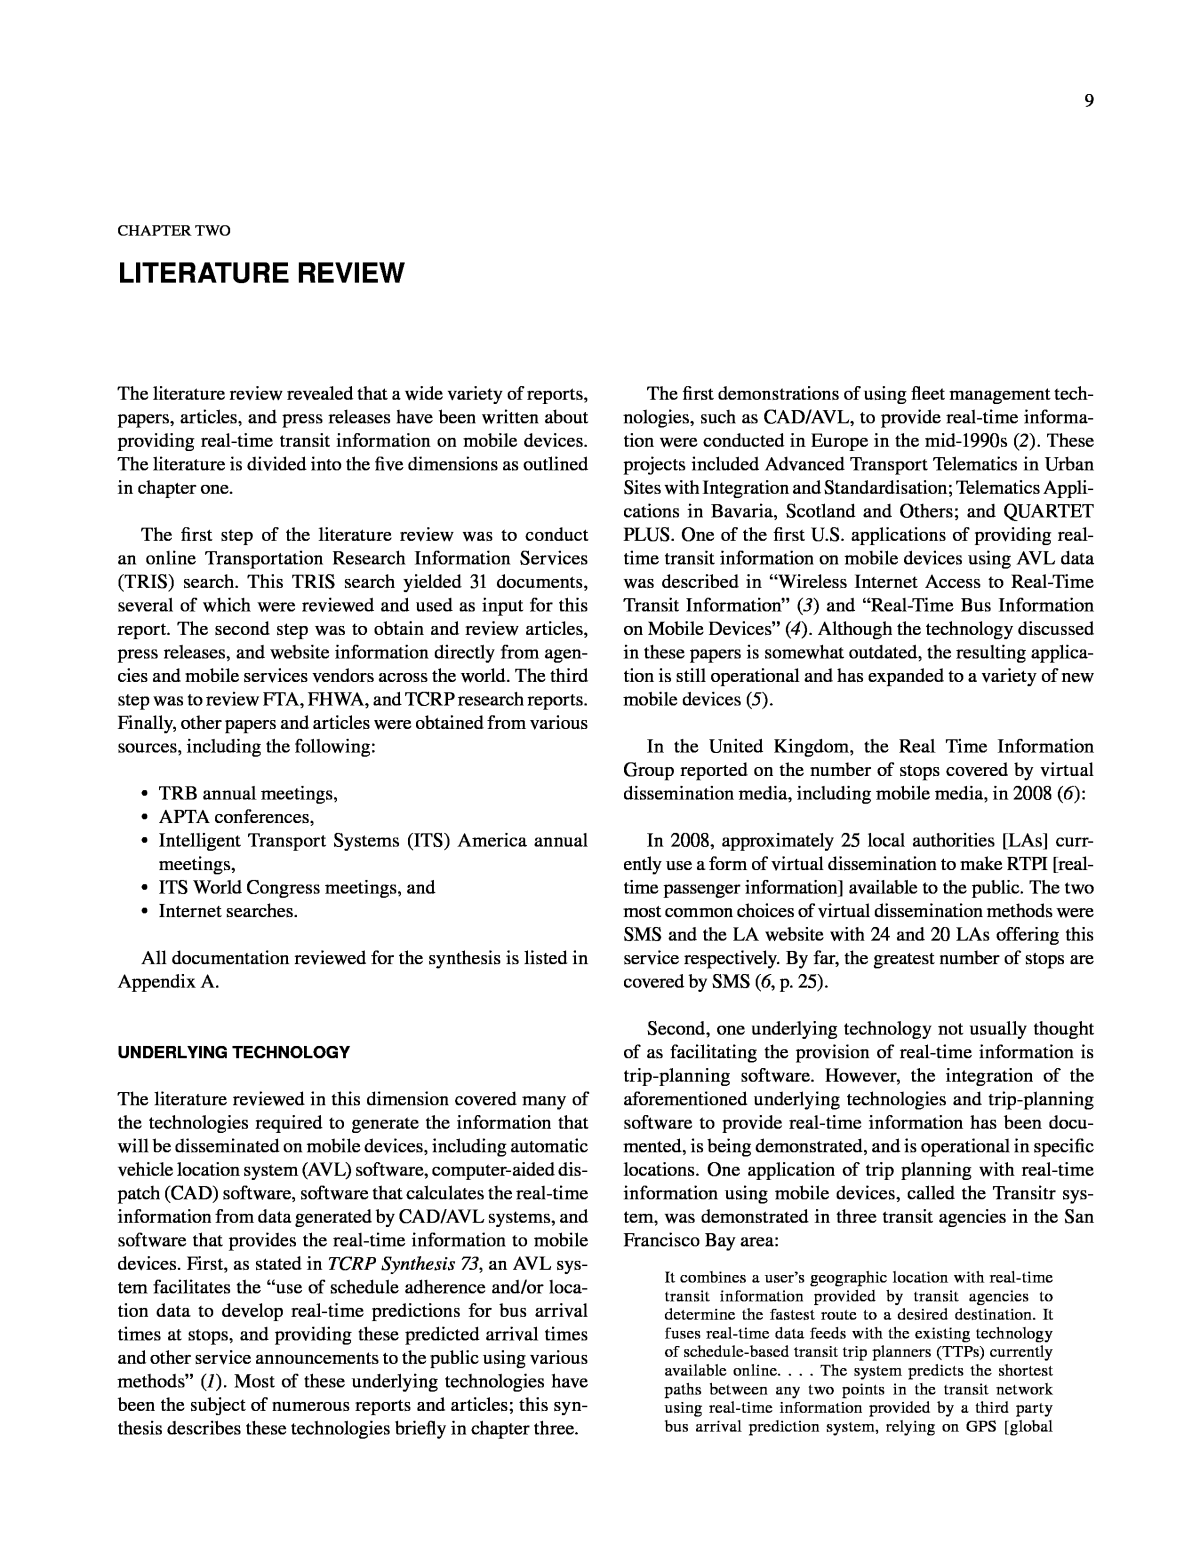 literature review for mobile phone